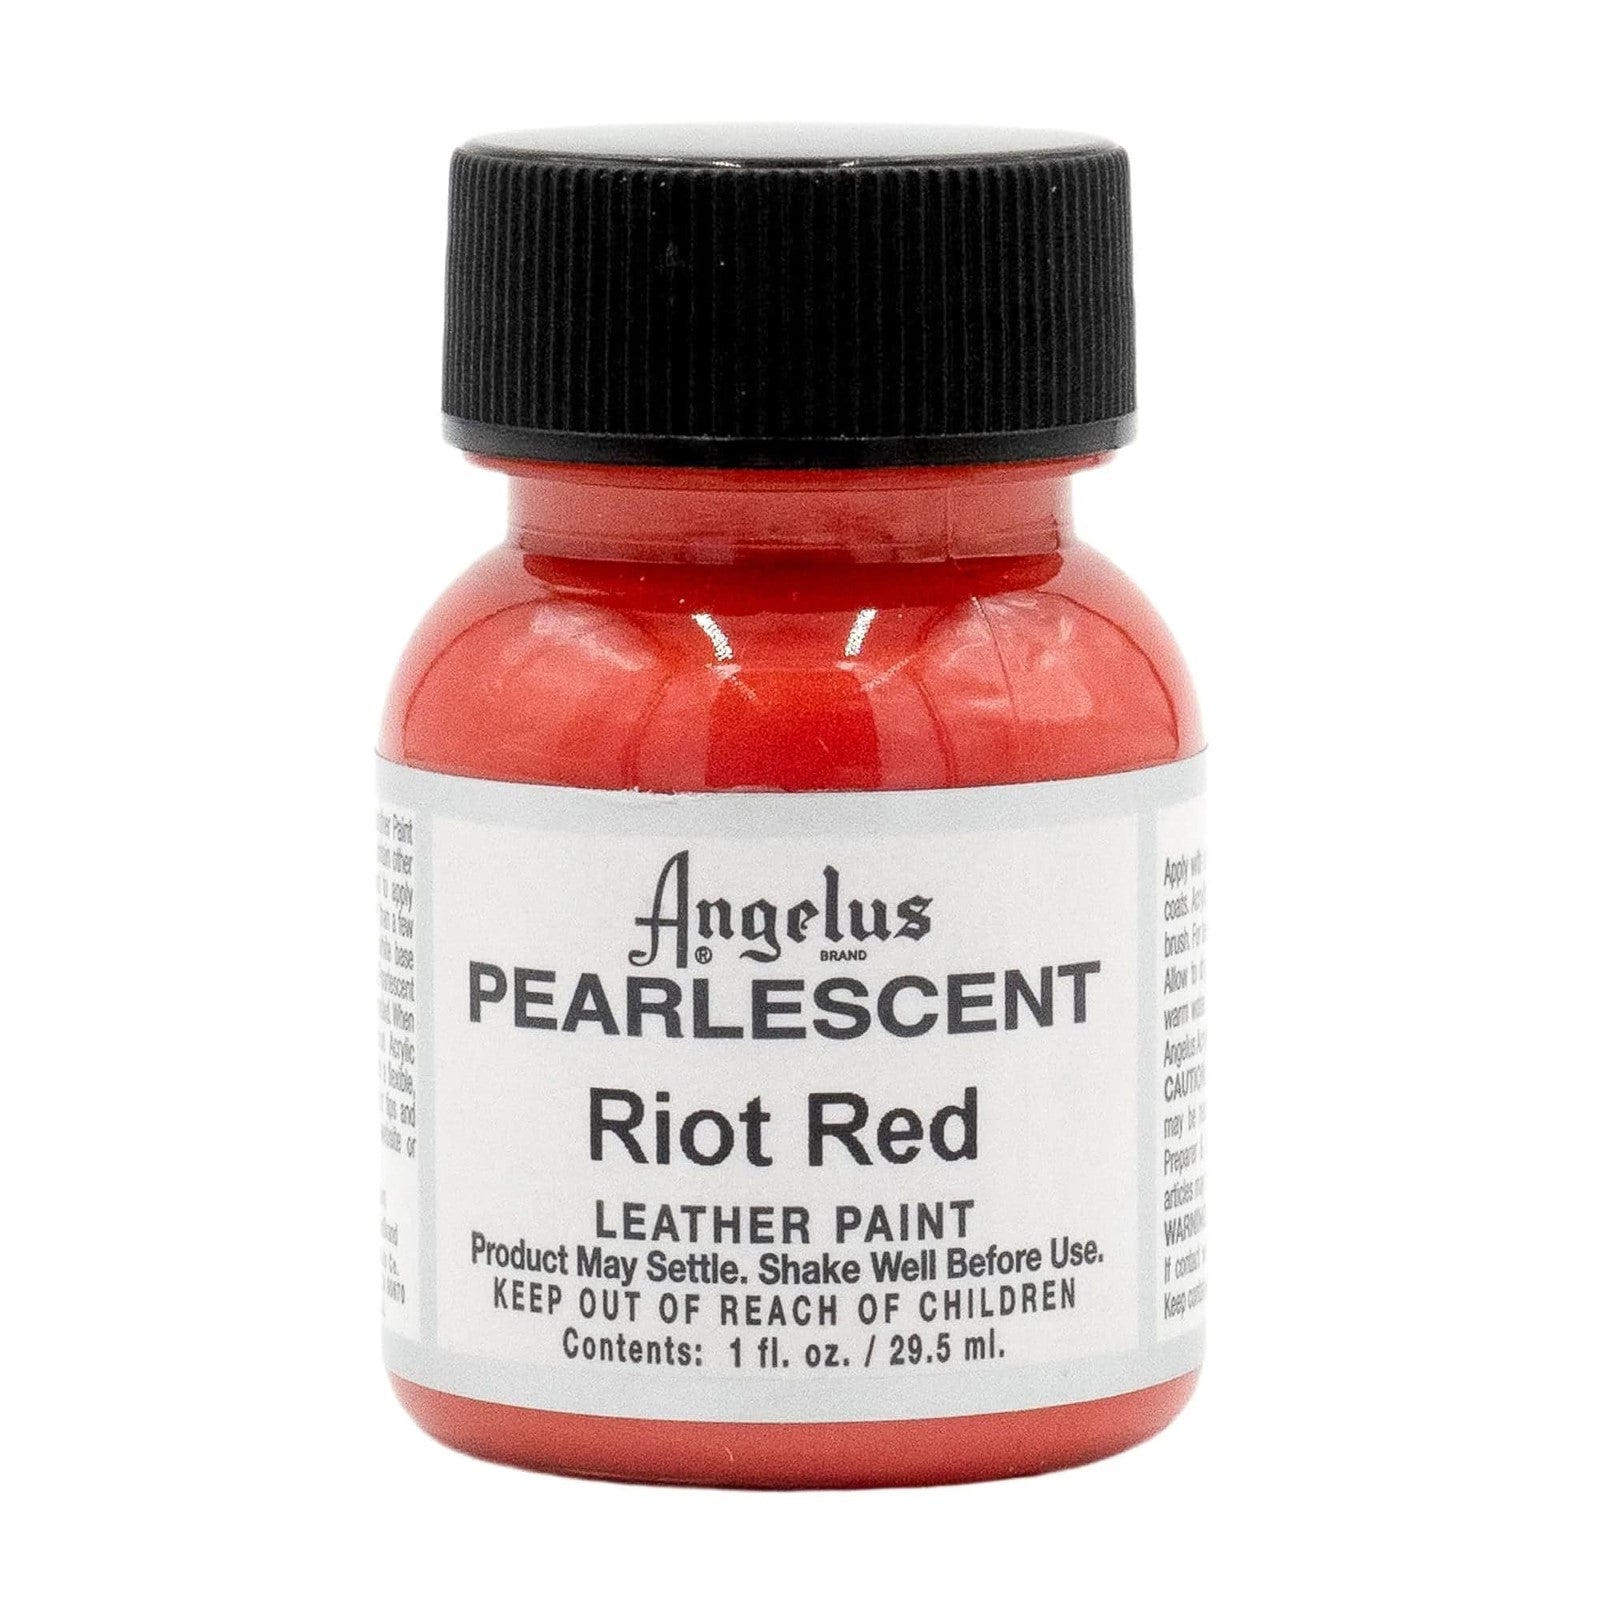 Angelus Pearlescent Paint 1oz Bottle Multiple Colors, Riot Red | The Leather Guy